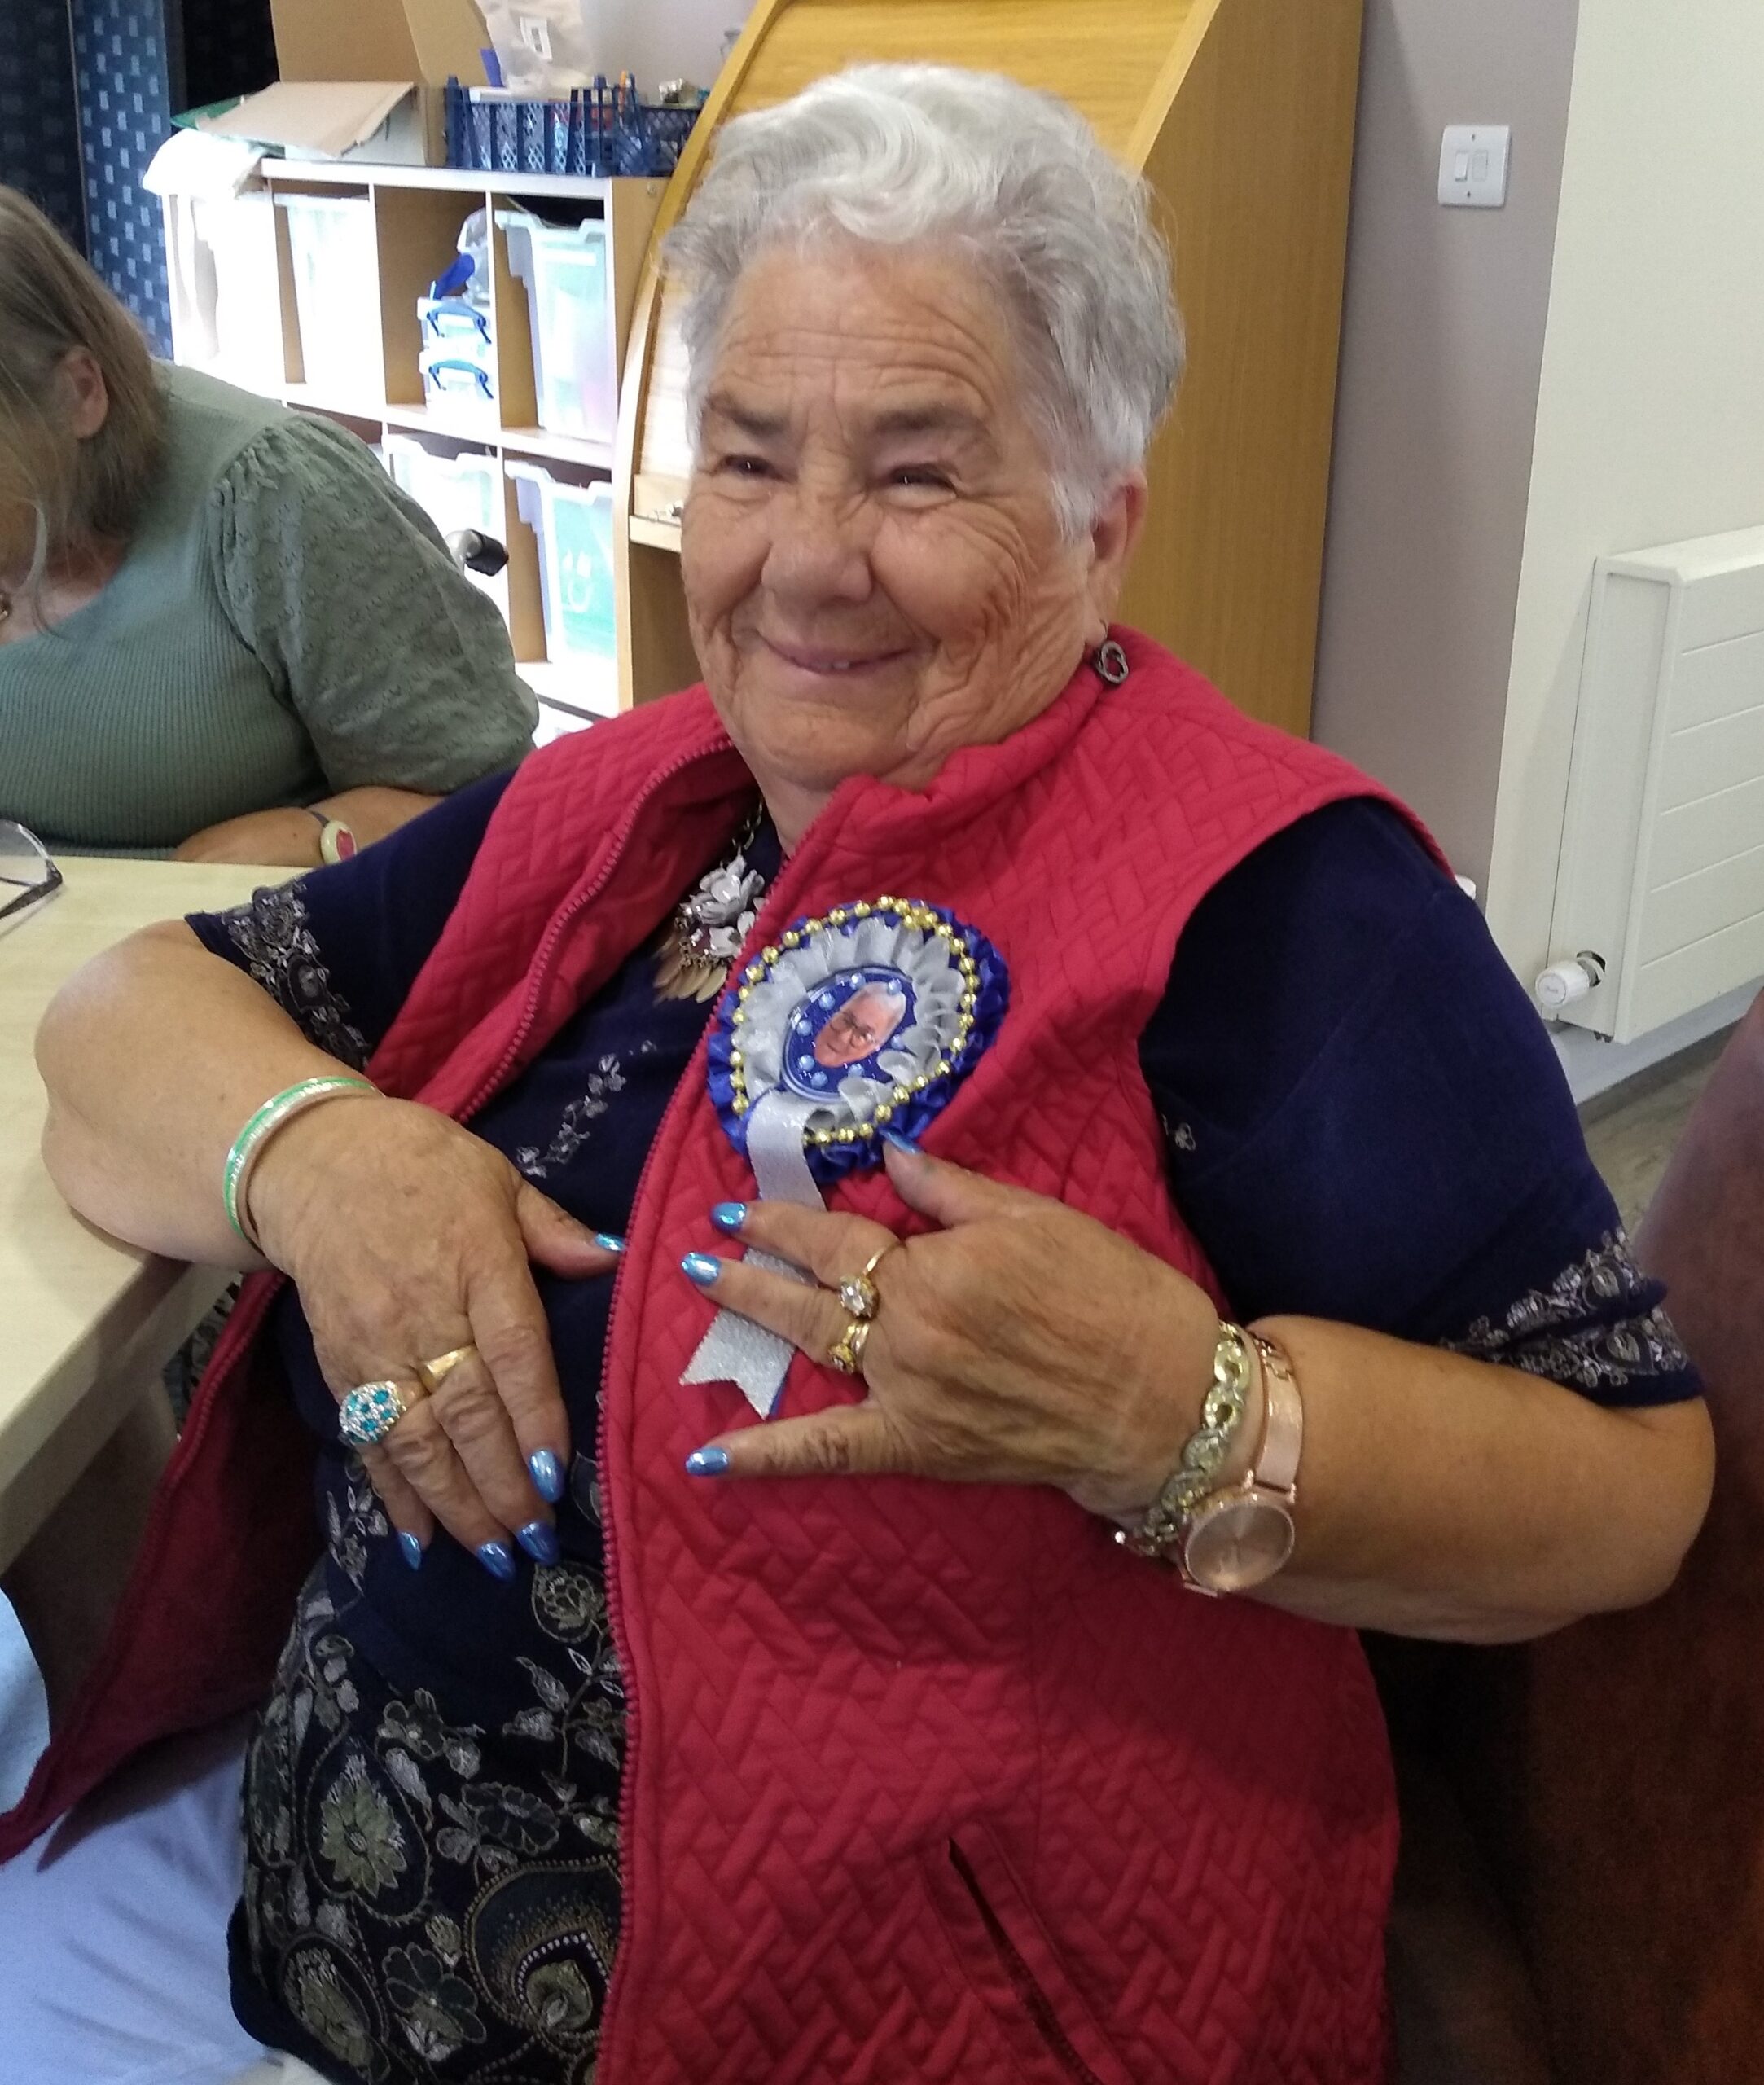 A person grins at the camera whilst proudly showing the rosette she's made, with a picture of herself and decorated with ribbons, beads and small blue gems